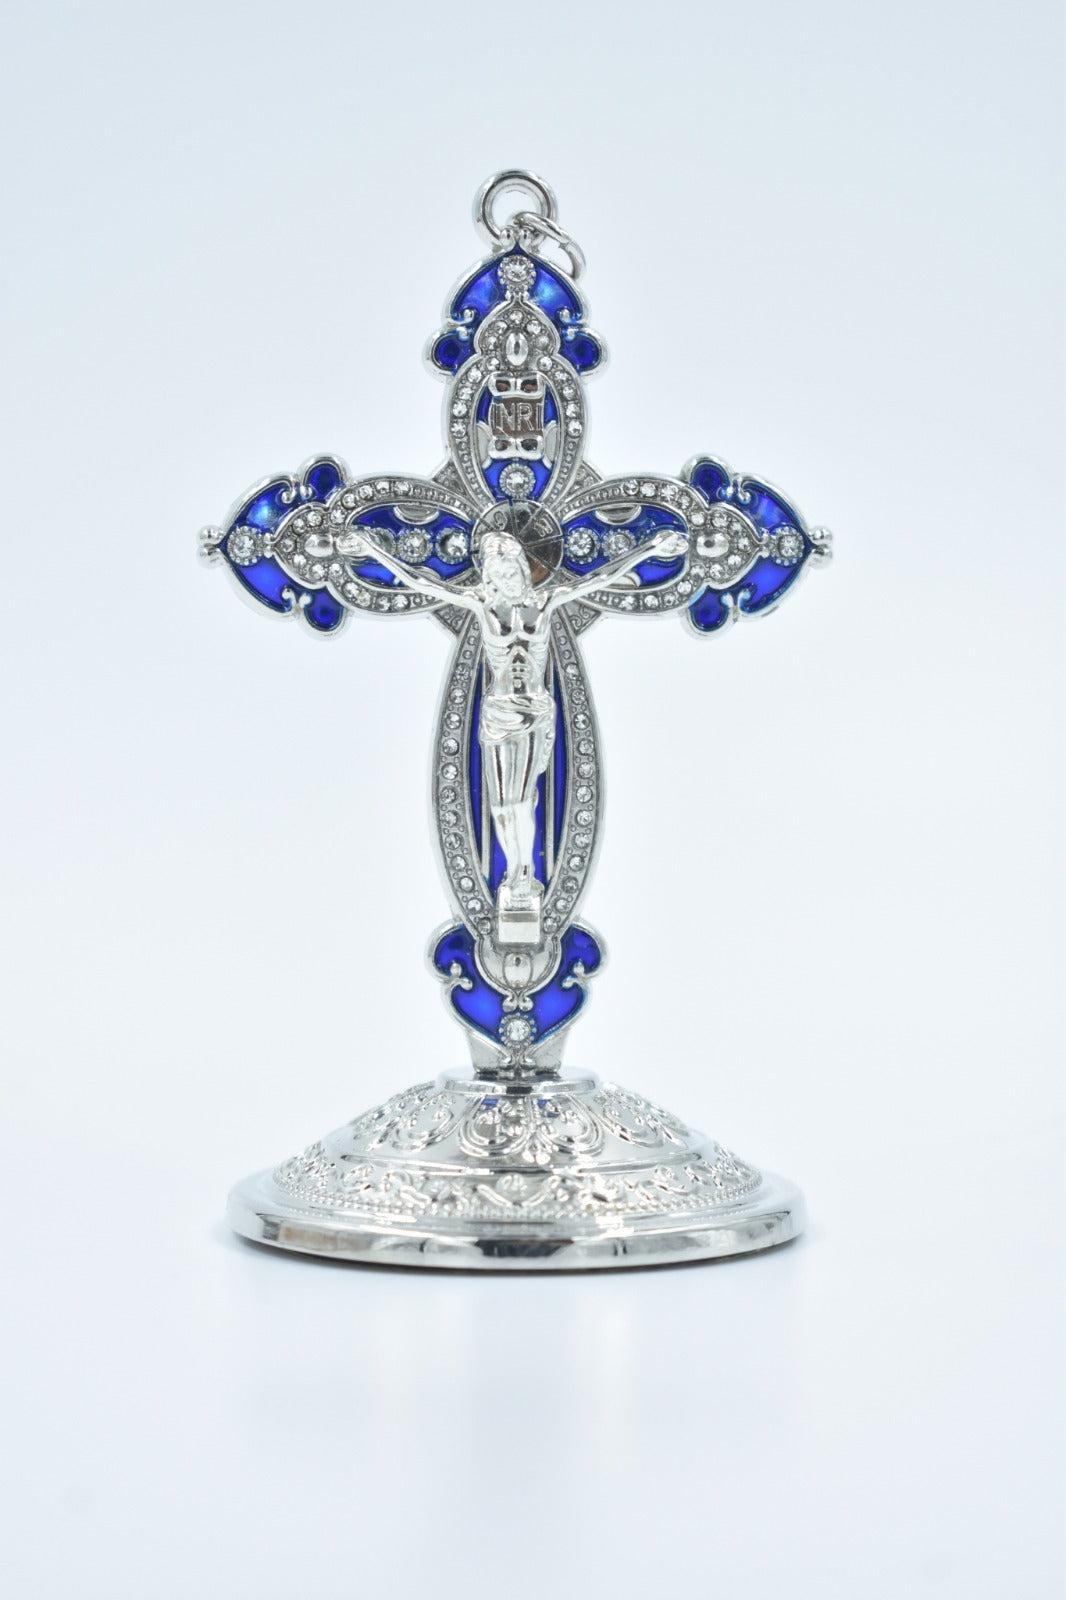 Silver and Blue Car Crucifix - Elegant and Protective Religious Accessory for Your Vehicle